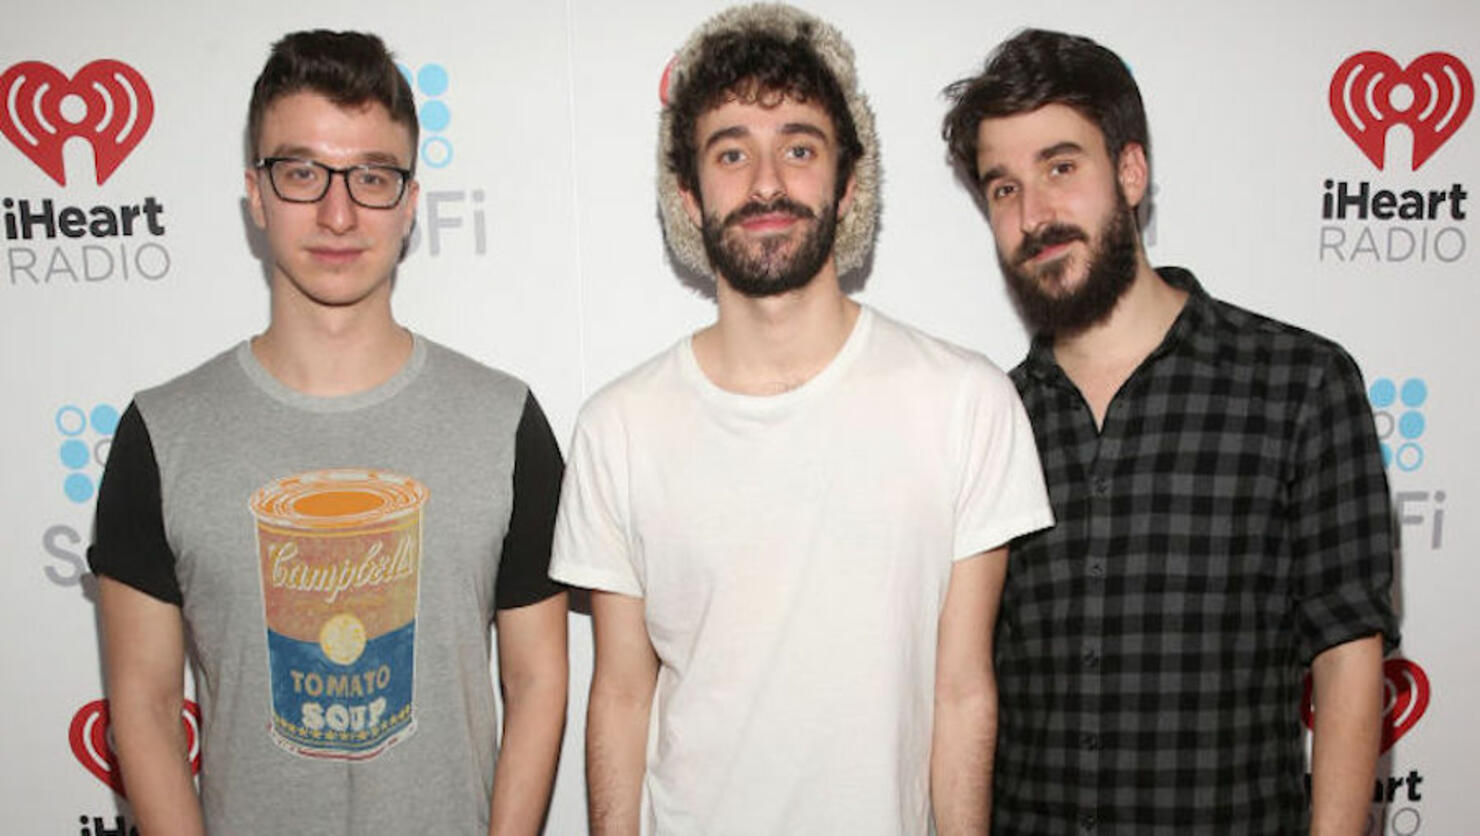 AJR Teases 'New Era': 'SOMETHING'S COMING'